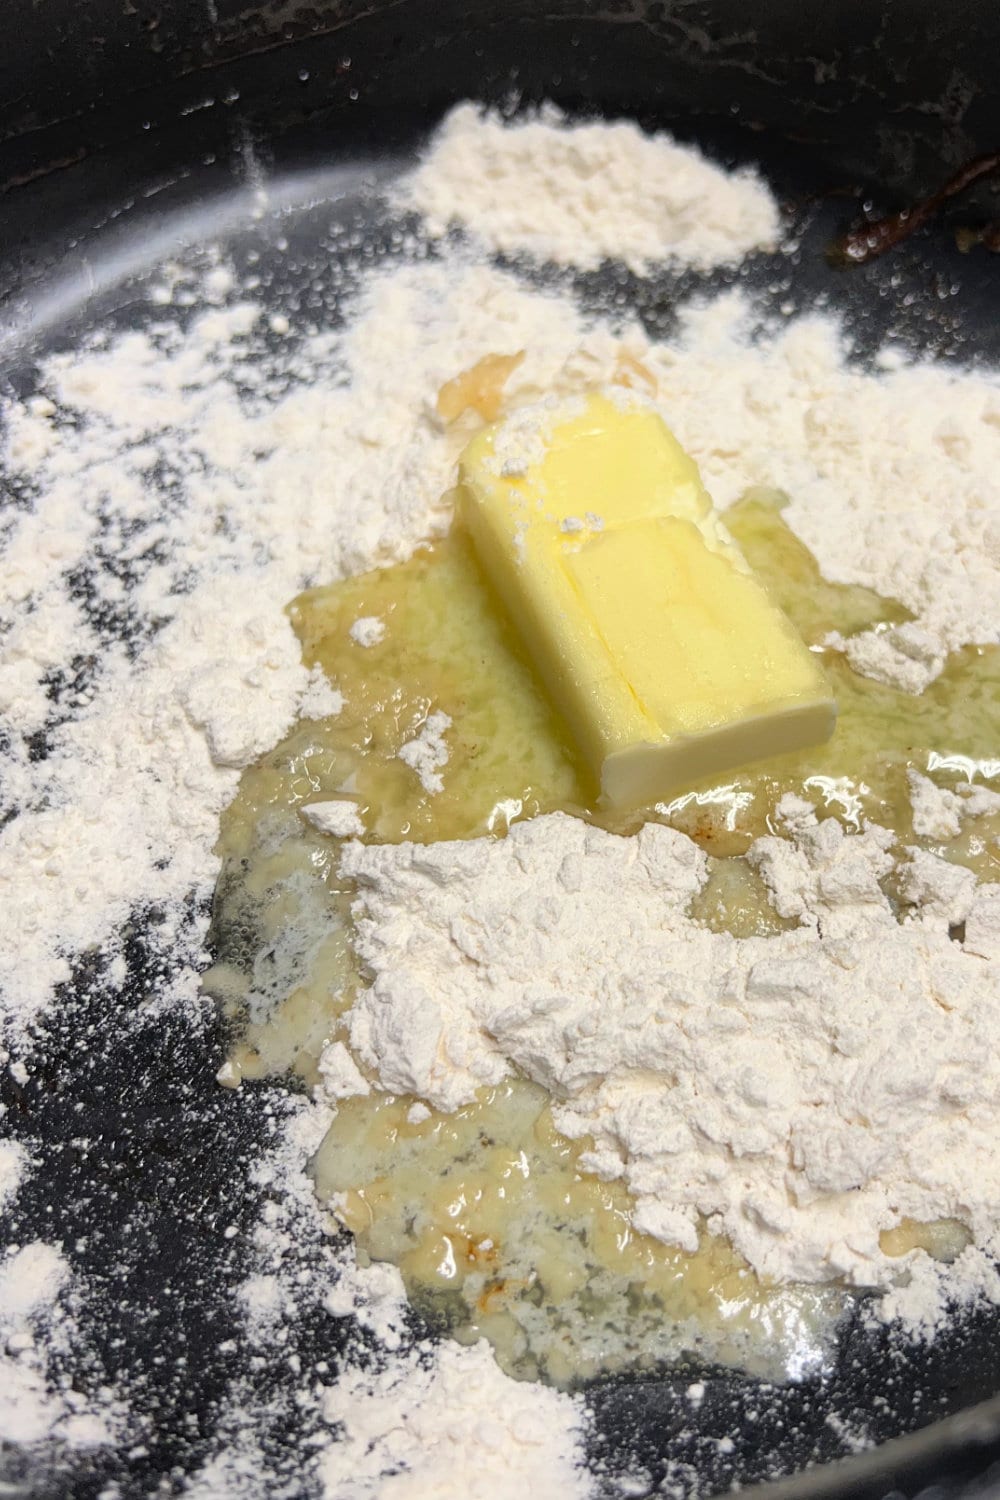 Butter and flour in a skillet to make a roux.